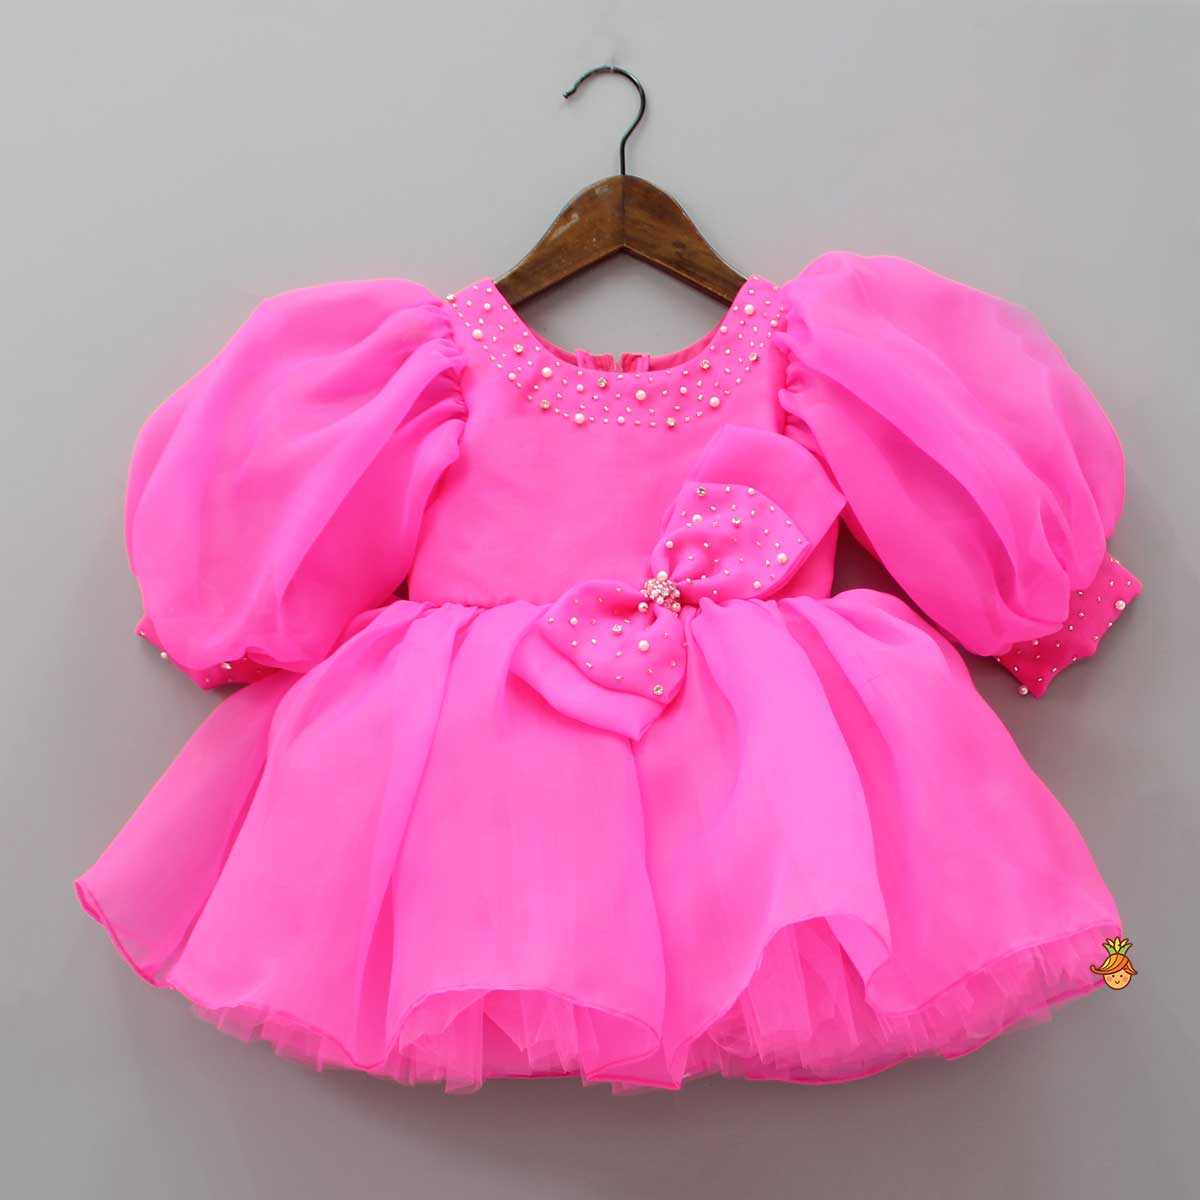 Pre Order: Cut Dana Embellished Gorgeous Pink Dress With Matching Swirled Hair Clip